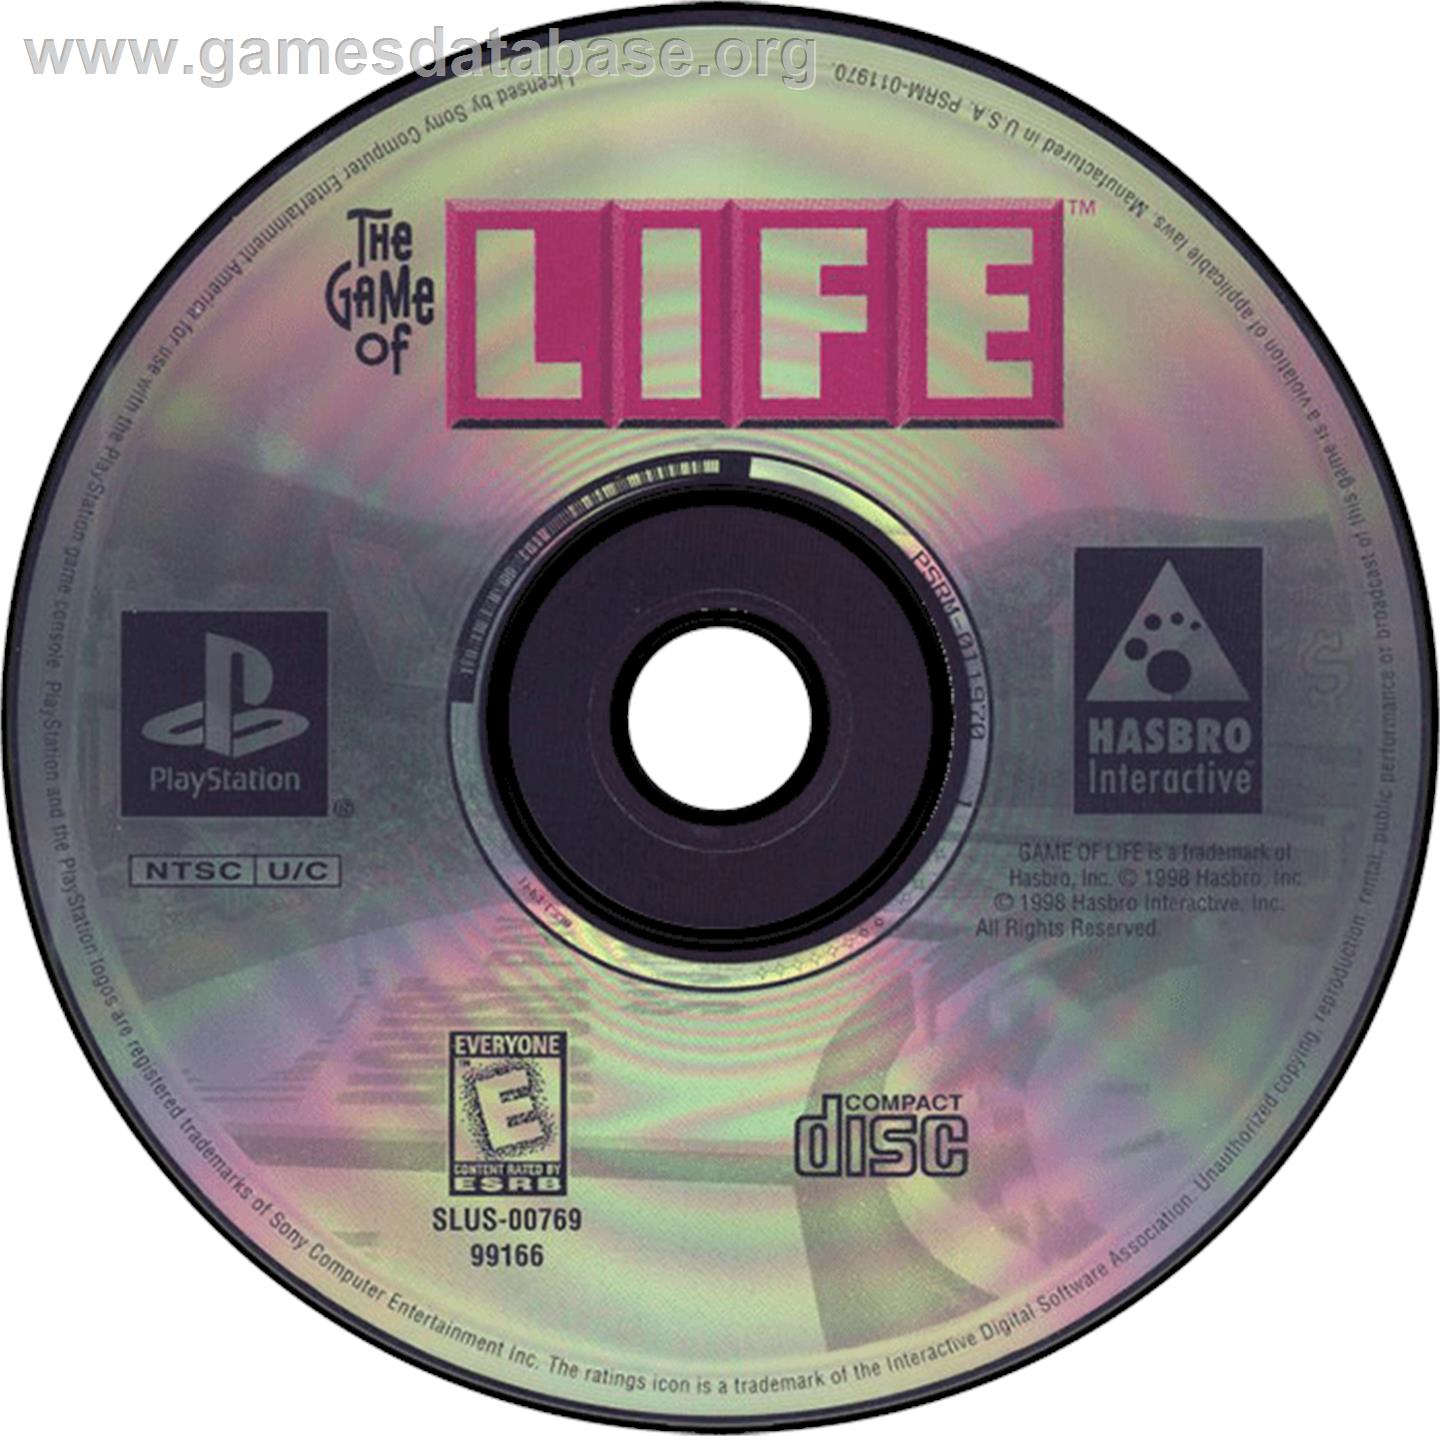 The Game of Life - Sony Playstation - Artwork - Disc